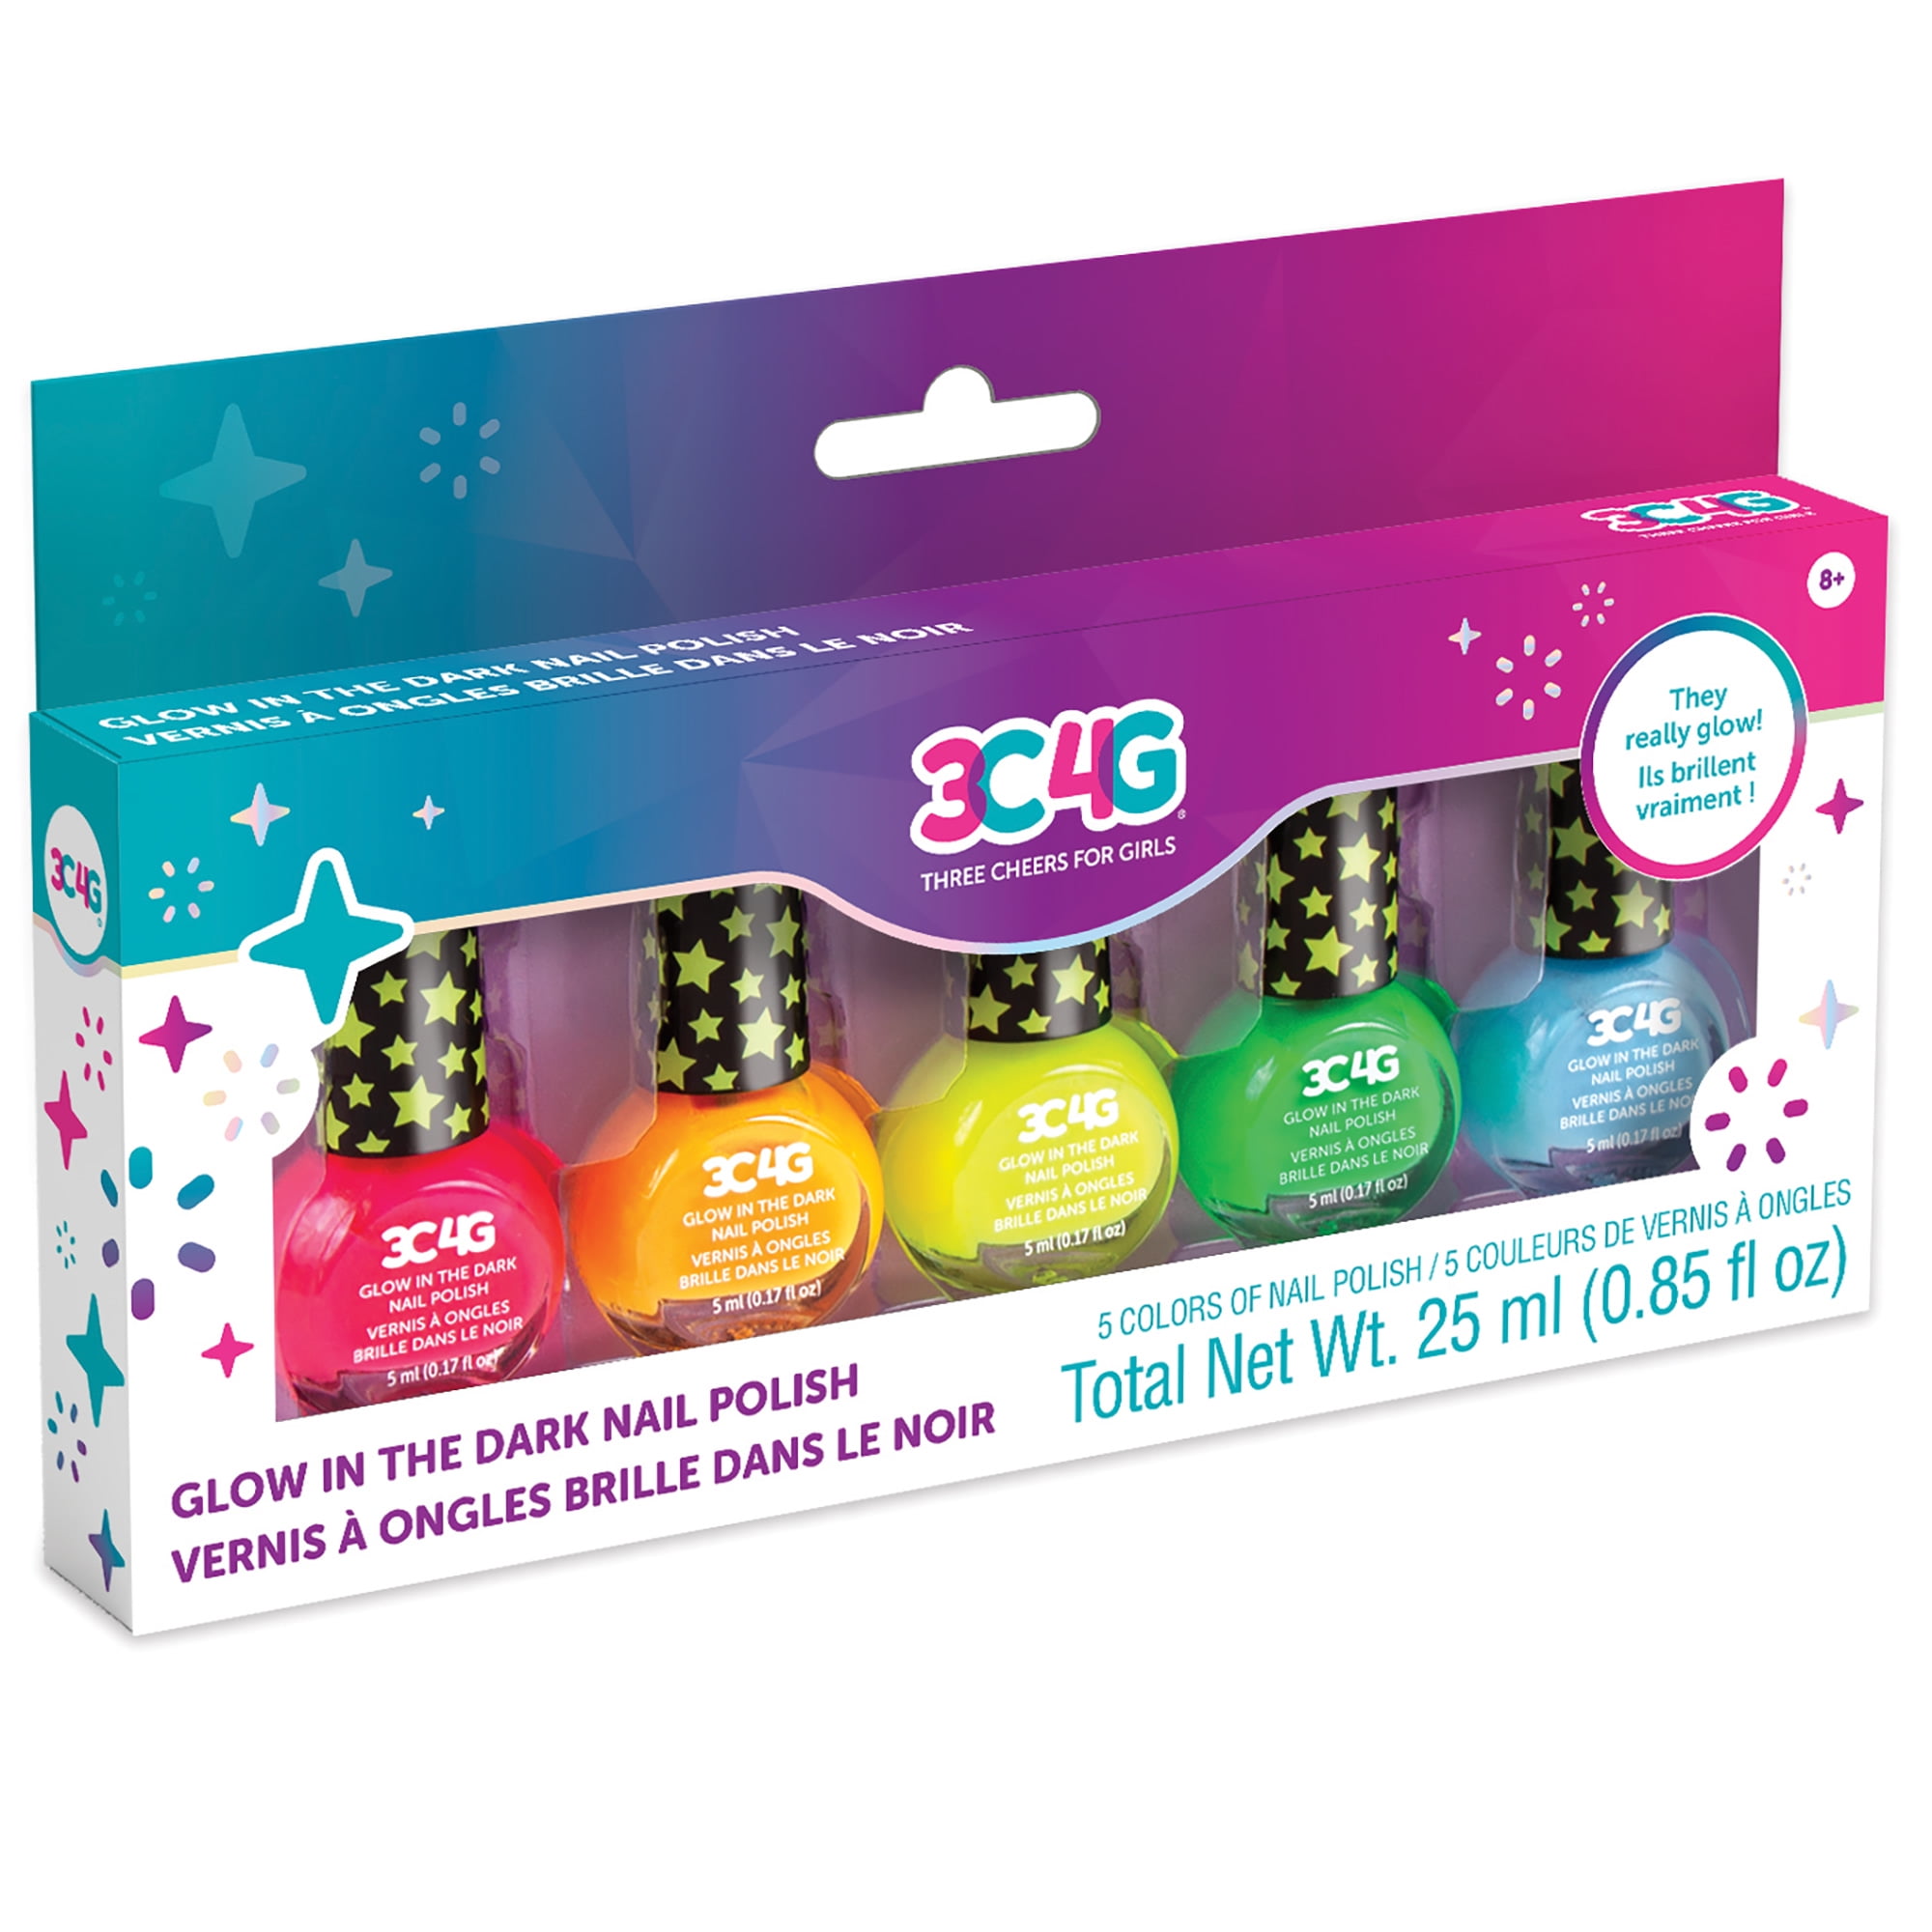 Claire's - Get your glow on with glow-in-the-dark nail polishes! 💫  #MerryAndBright